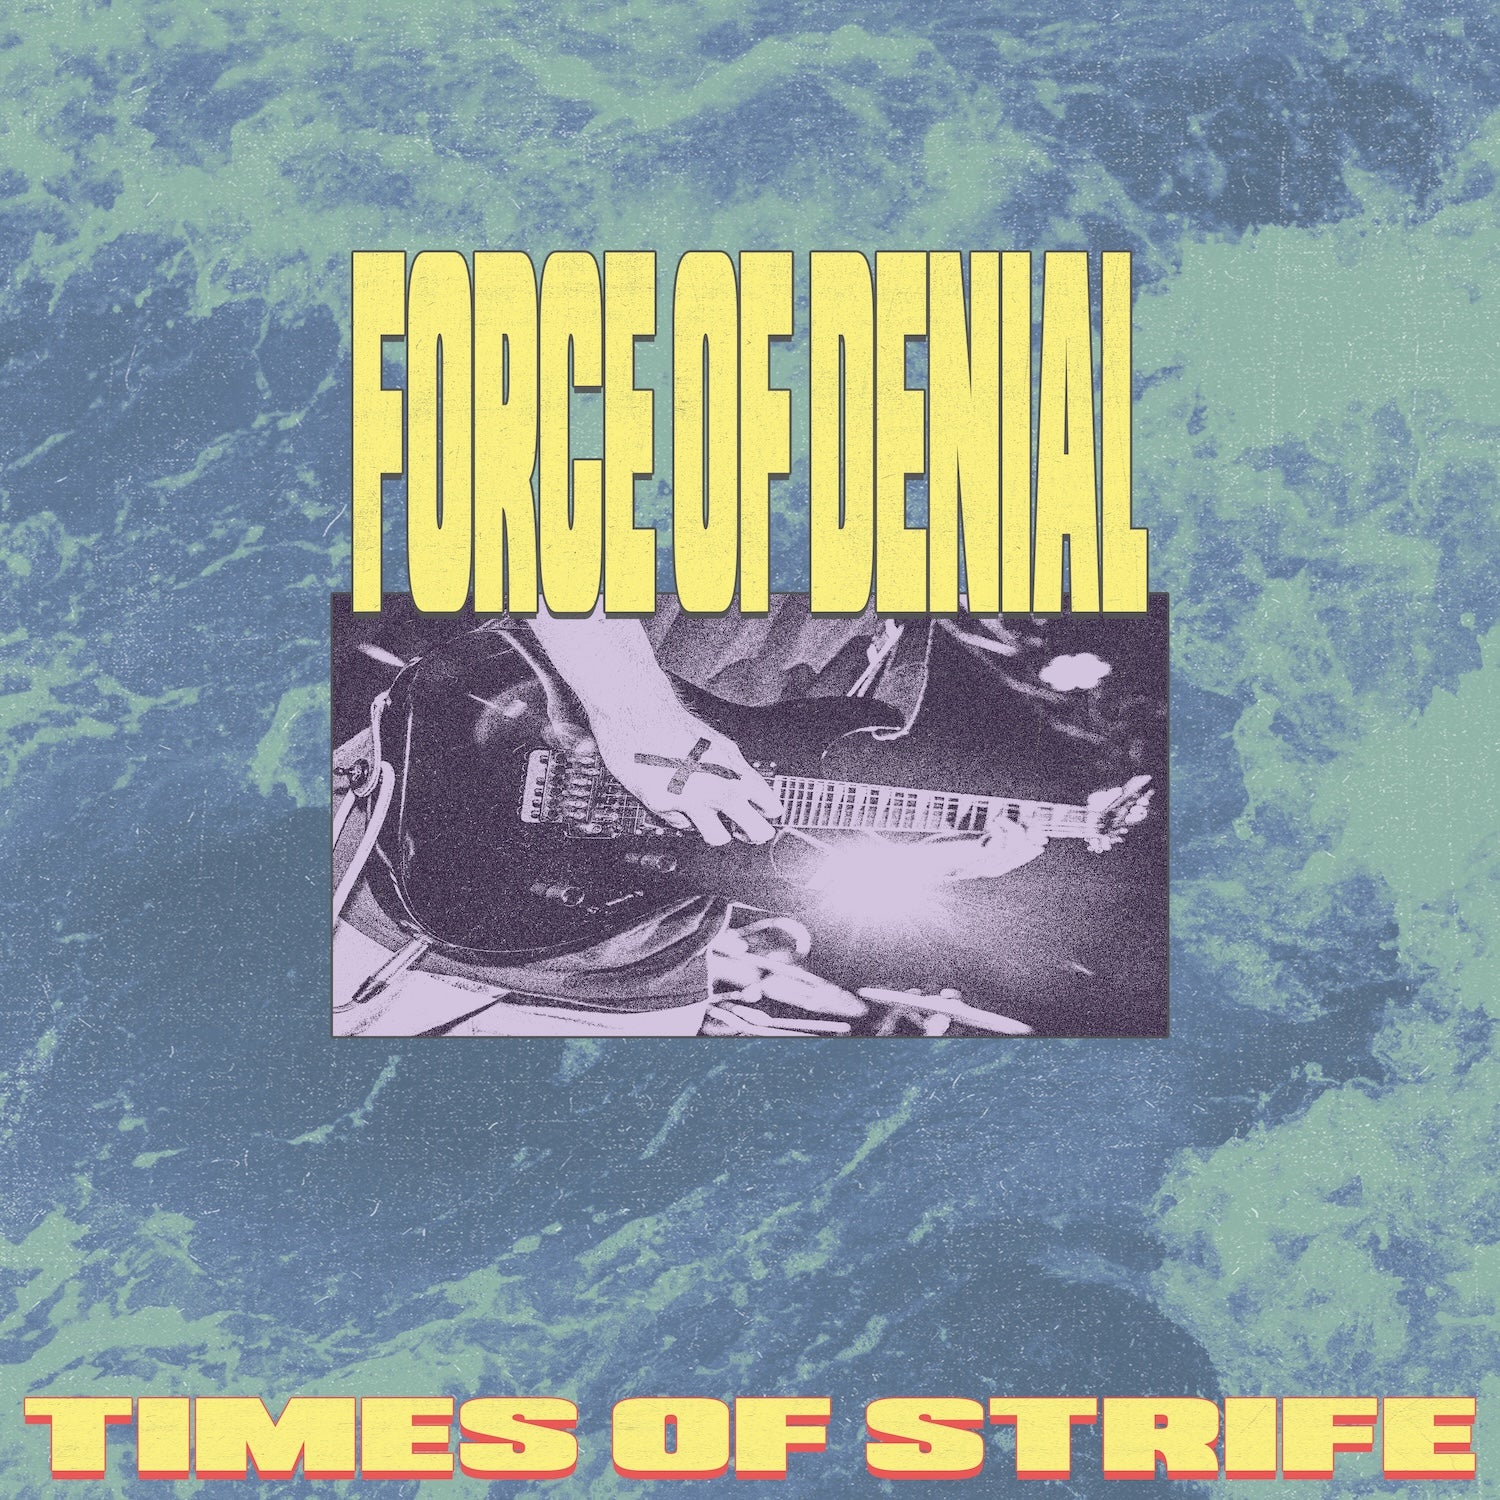 FORCE OF DENIAL "Times Of Strife" 7"